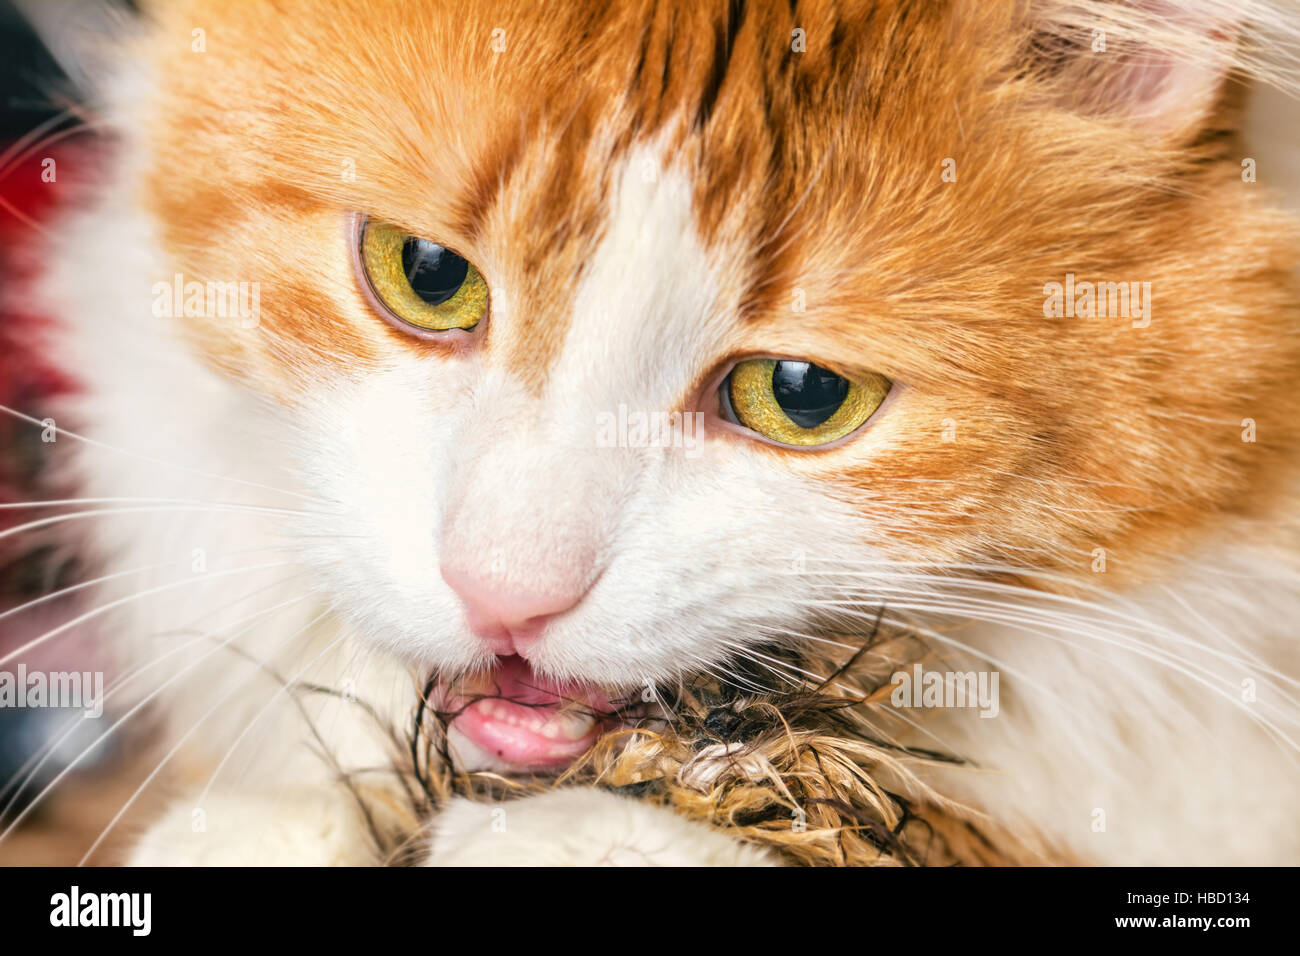 Adult nice red cat like predator with toy Stock Photo